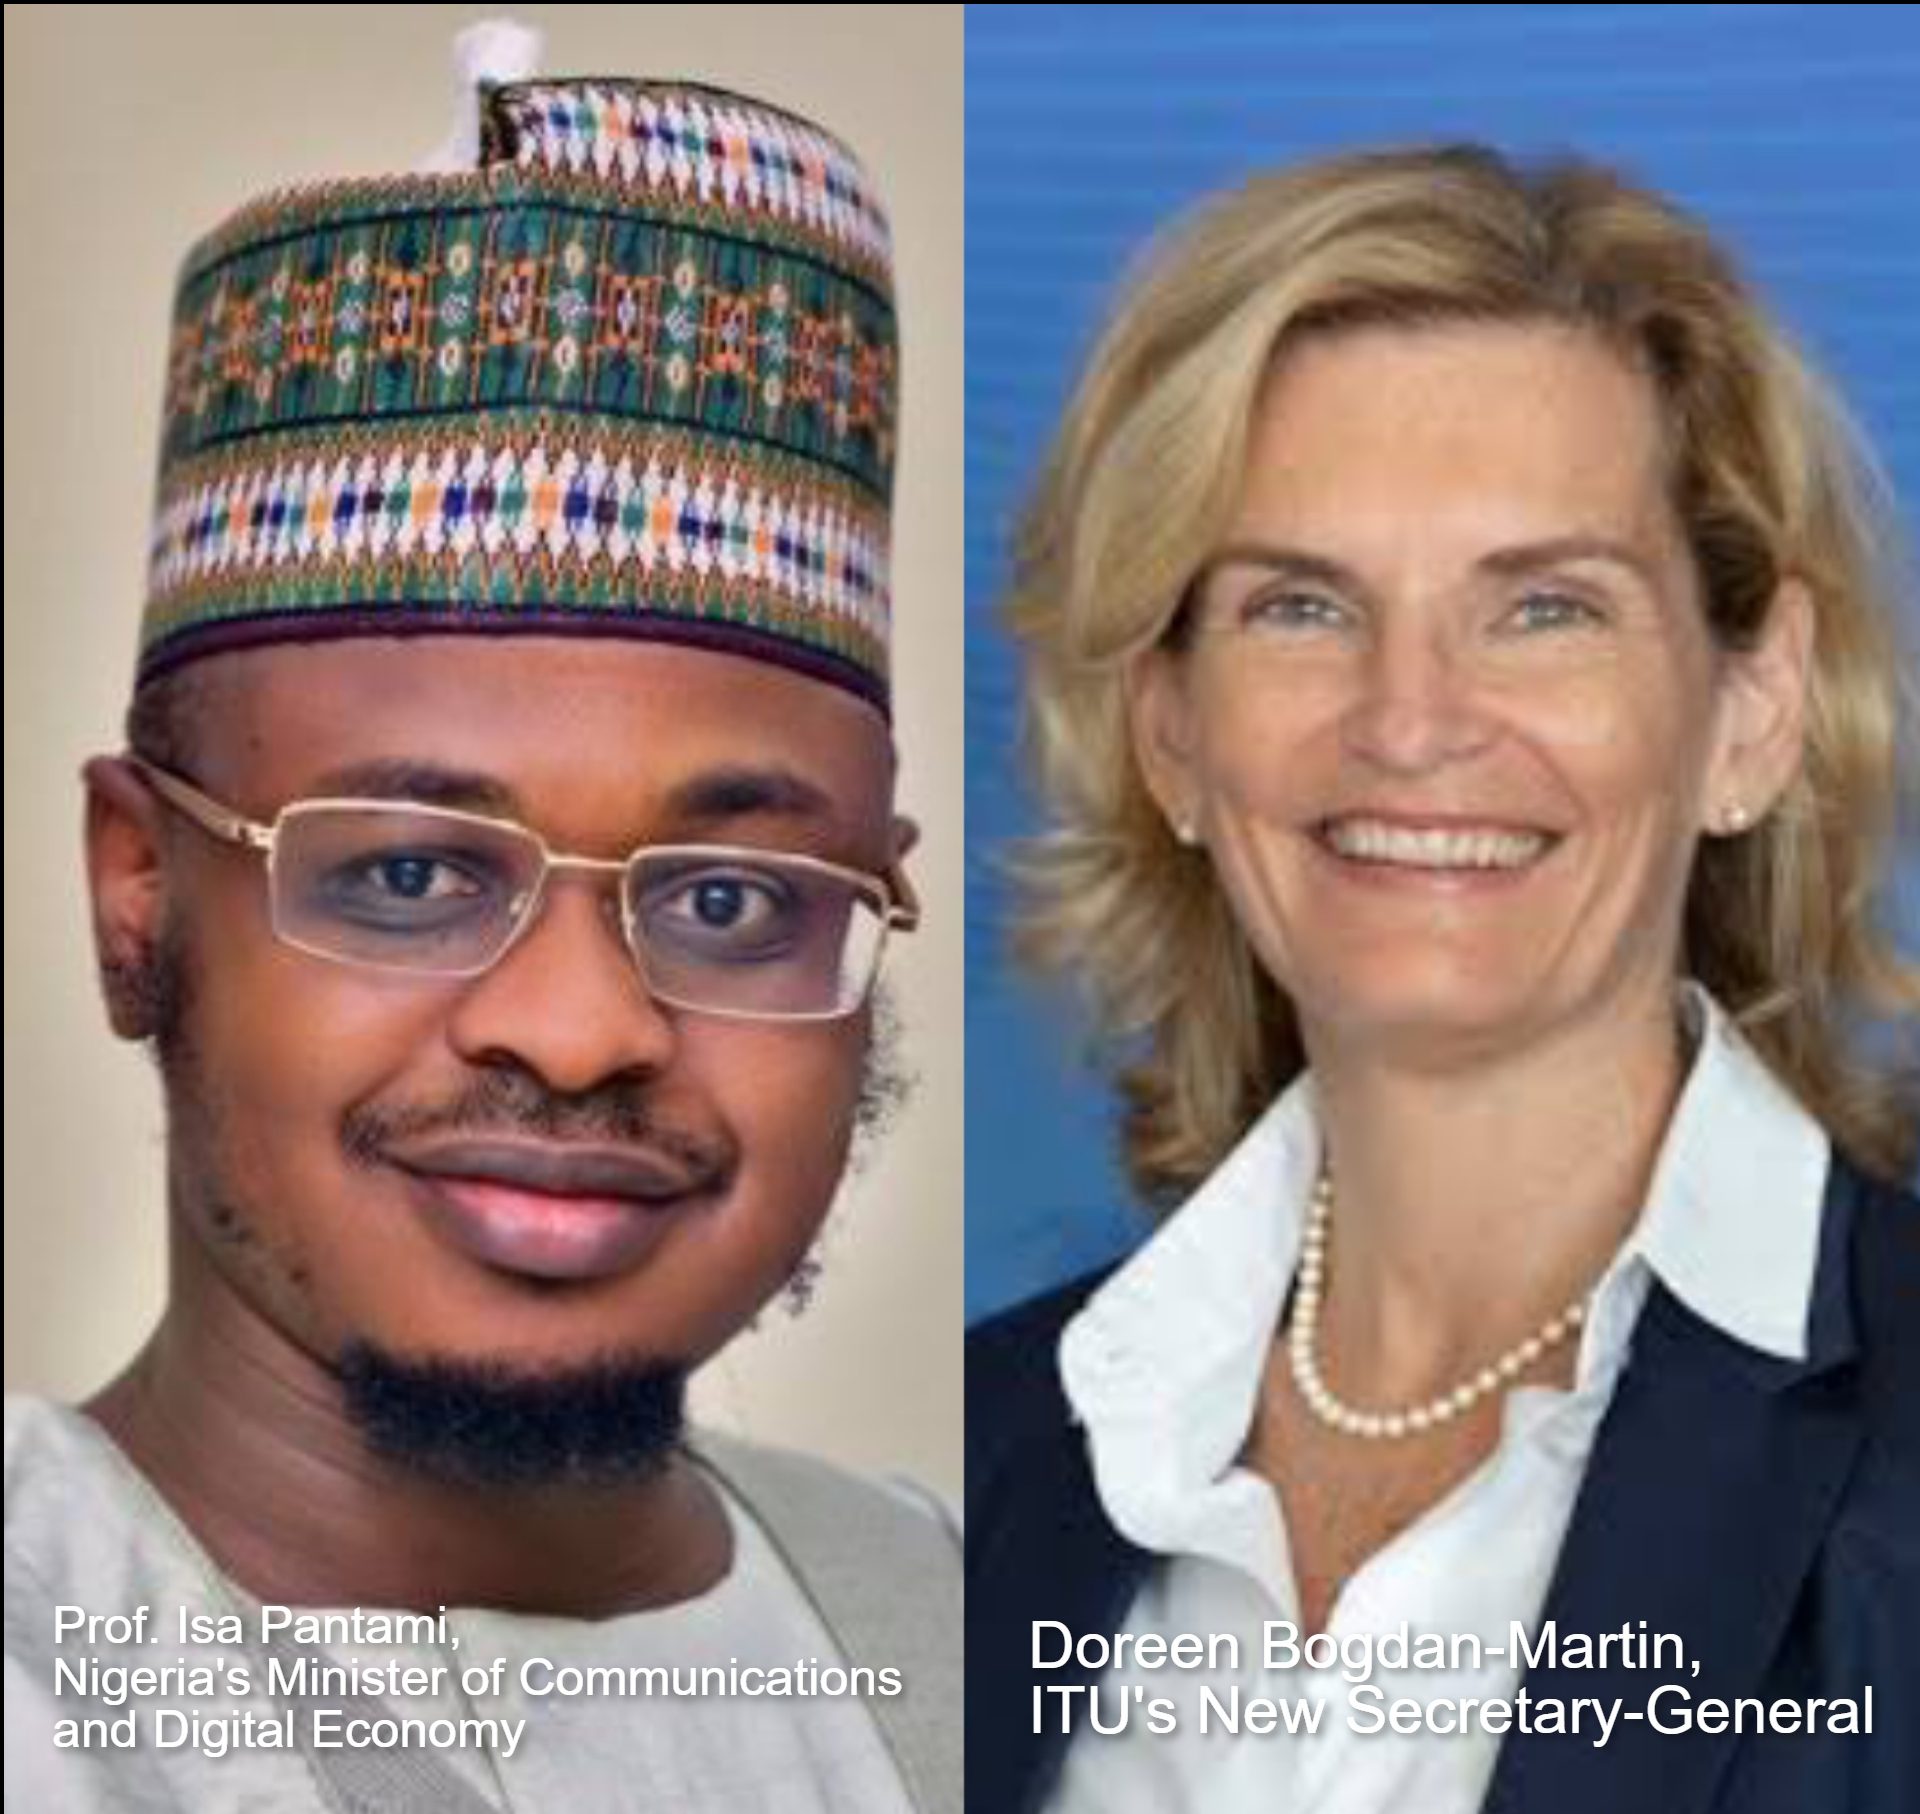 INSIGHT: As ITU’s New Leadership Vision Aligns with Nigeria’s Digital Economy Drive